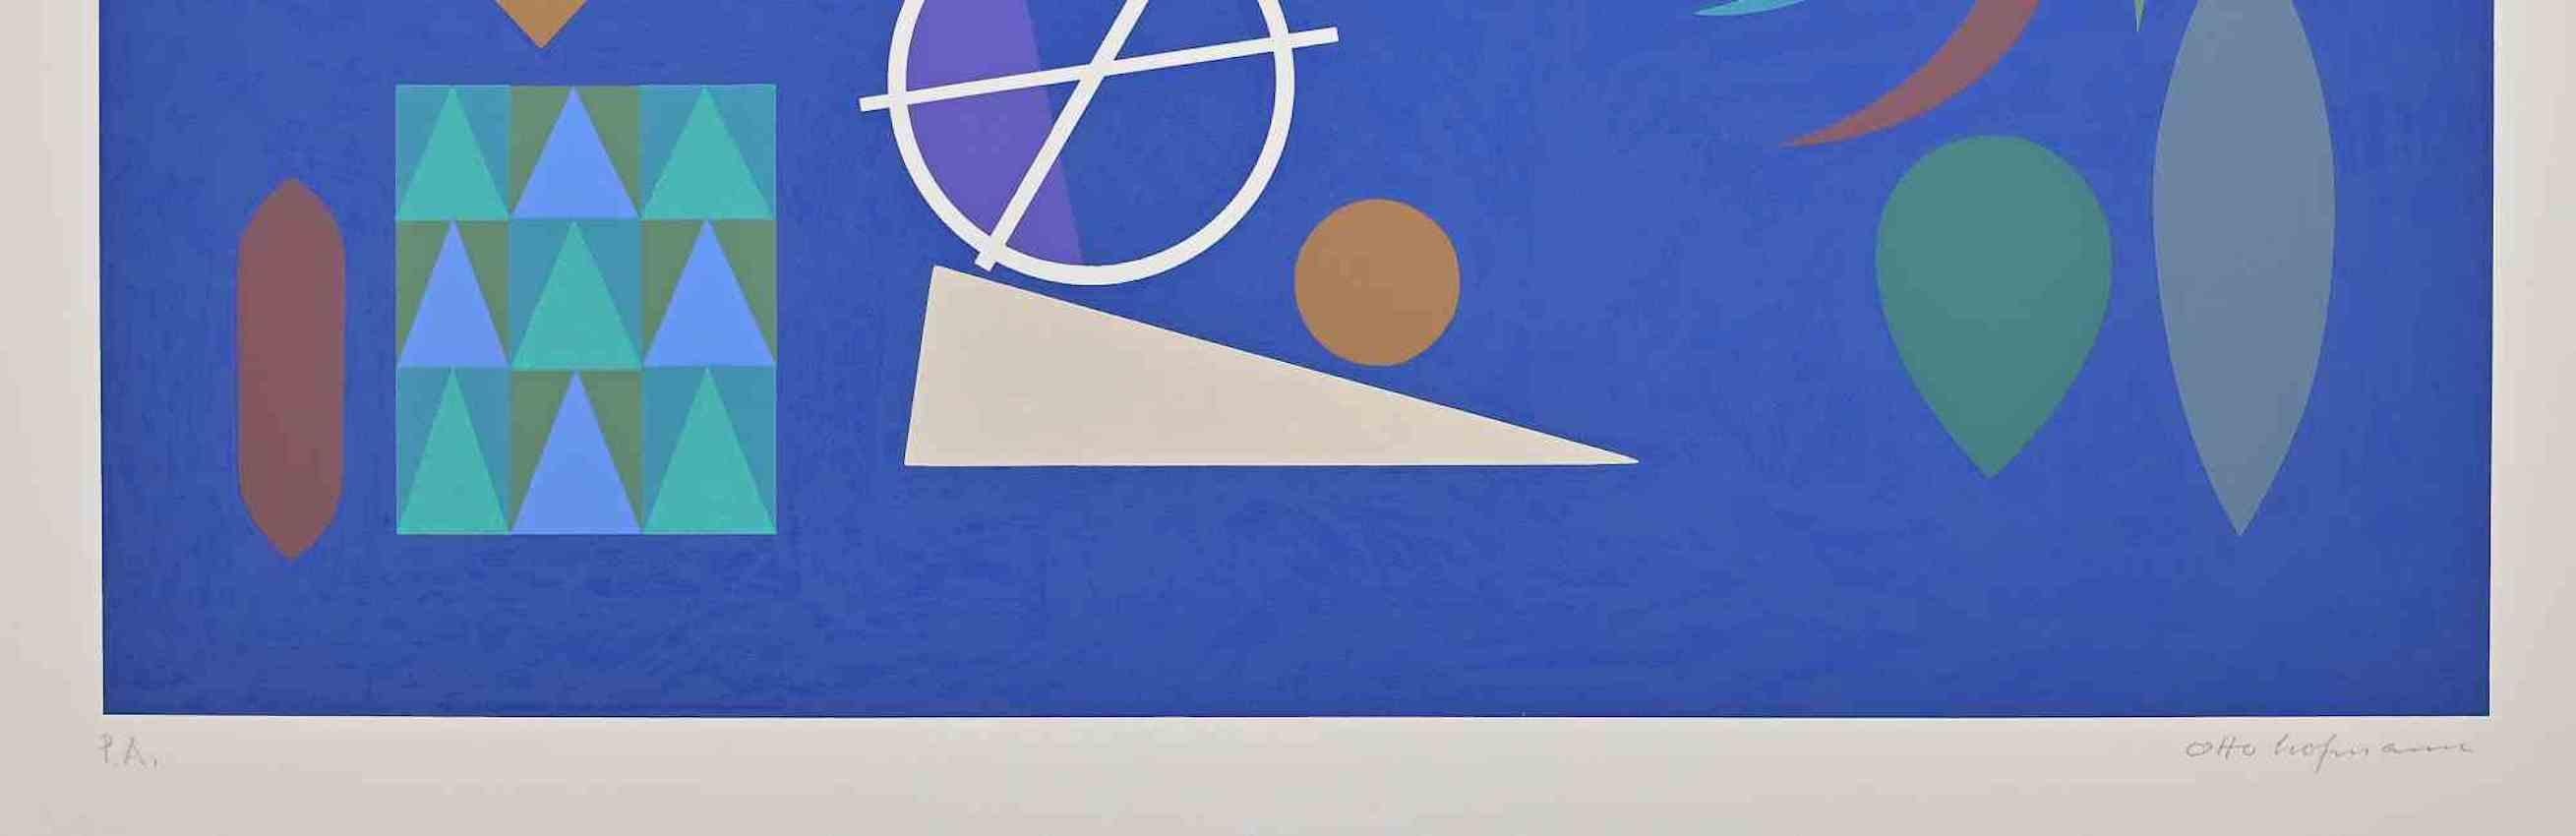 Blue composition is an original contemporary artwork realizedby Otto Hofmann in 1989.

Mixed colored serigraph.

Hand signed on the lower right margin.

Numbered on the lower left. Artist proof.

The artwork is from a potfolio edited by Edizioni